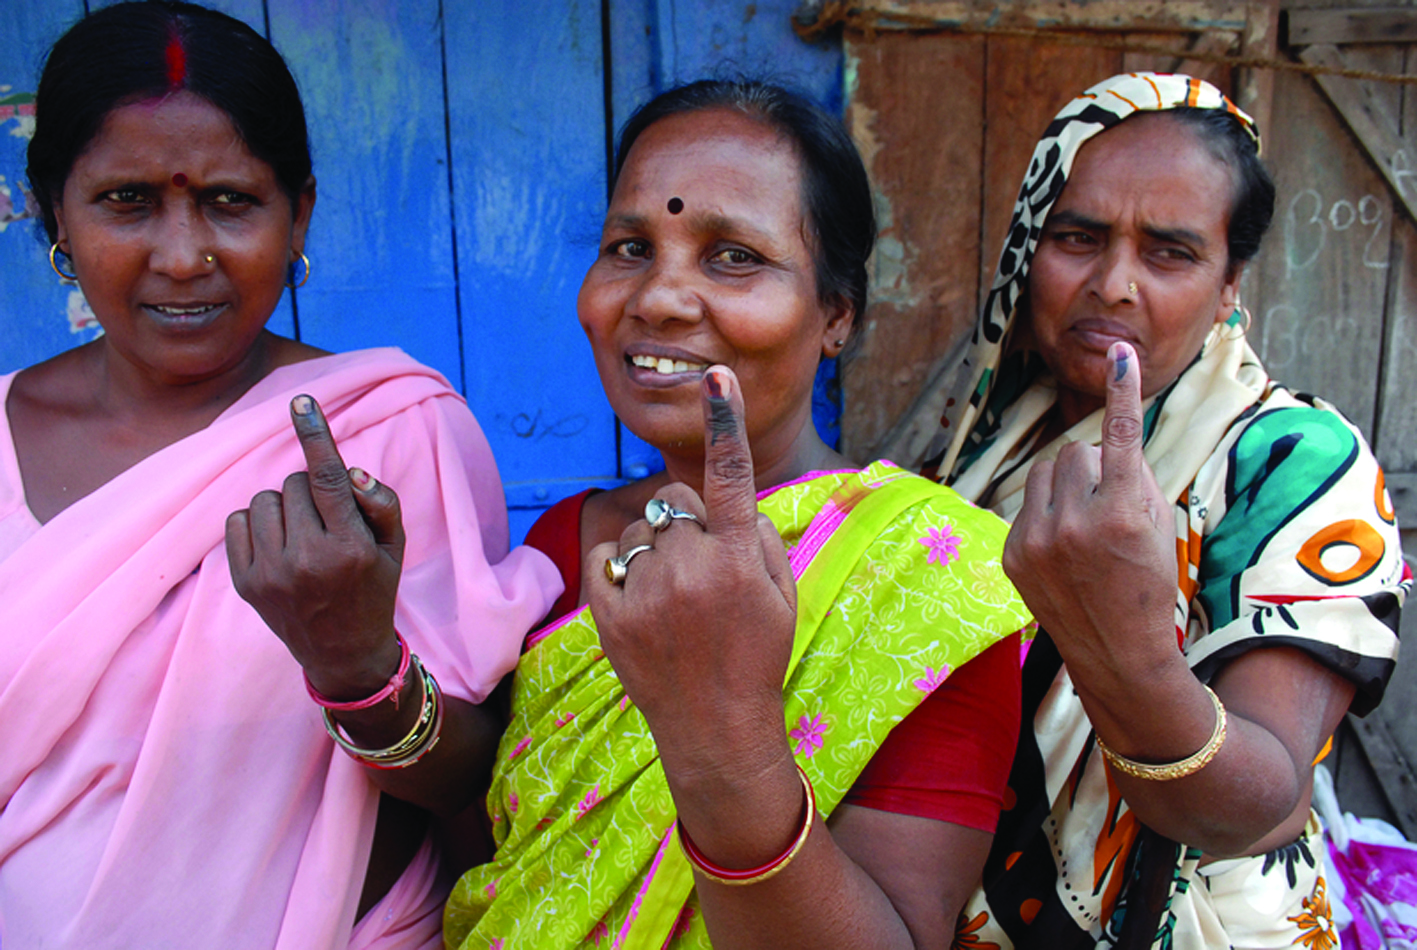 India’s voter power, as indelible as the ink on fingers.